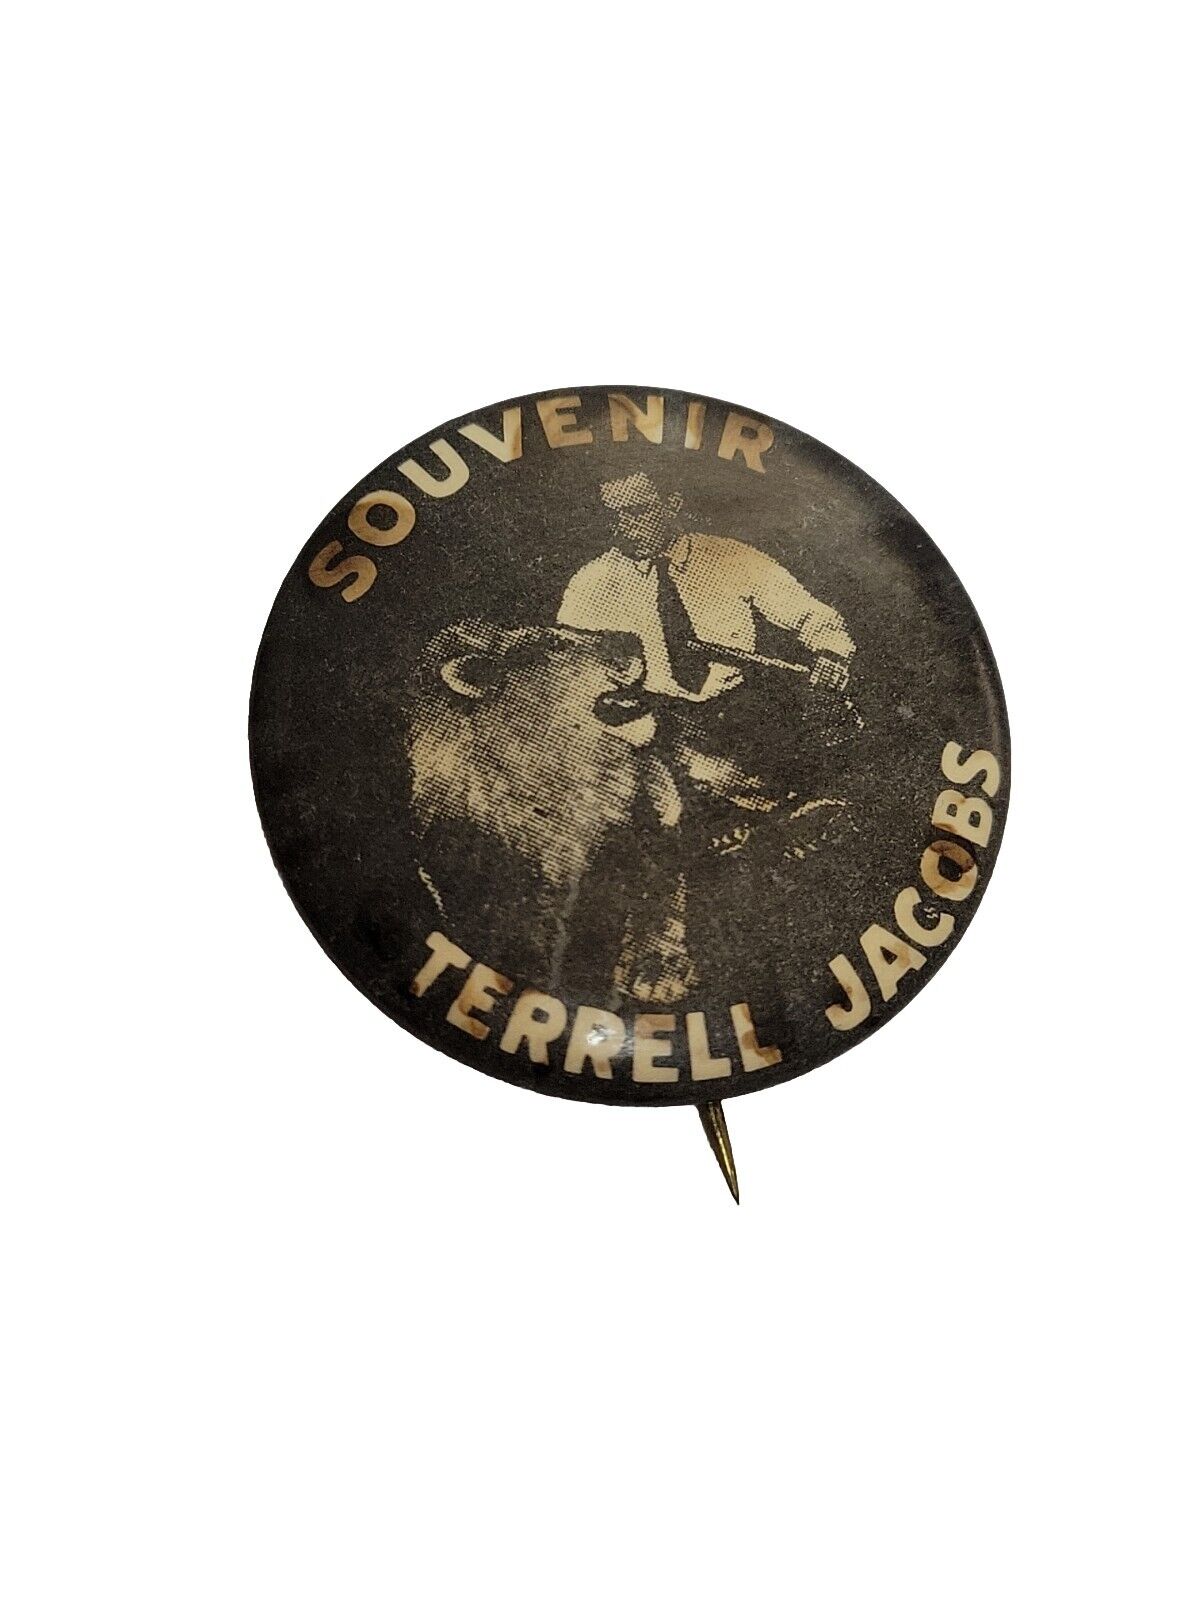 Terrell Jacobs Souviner Button, Circus Performer Lion Tamer, Black & White